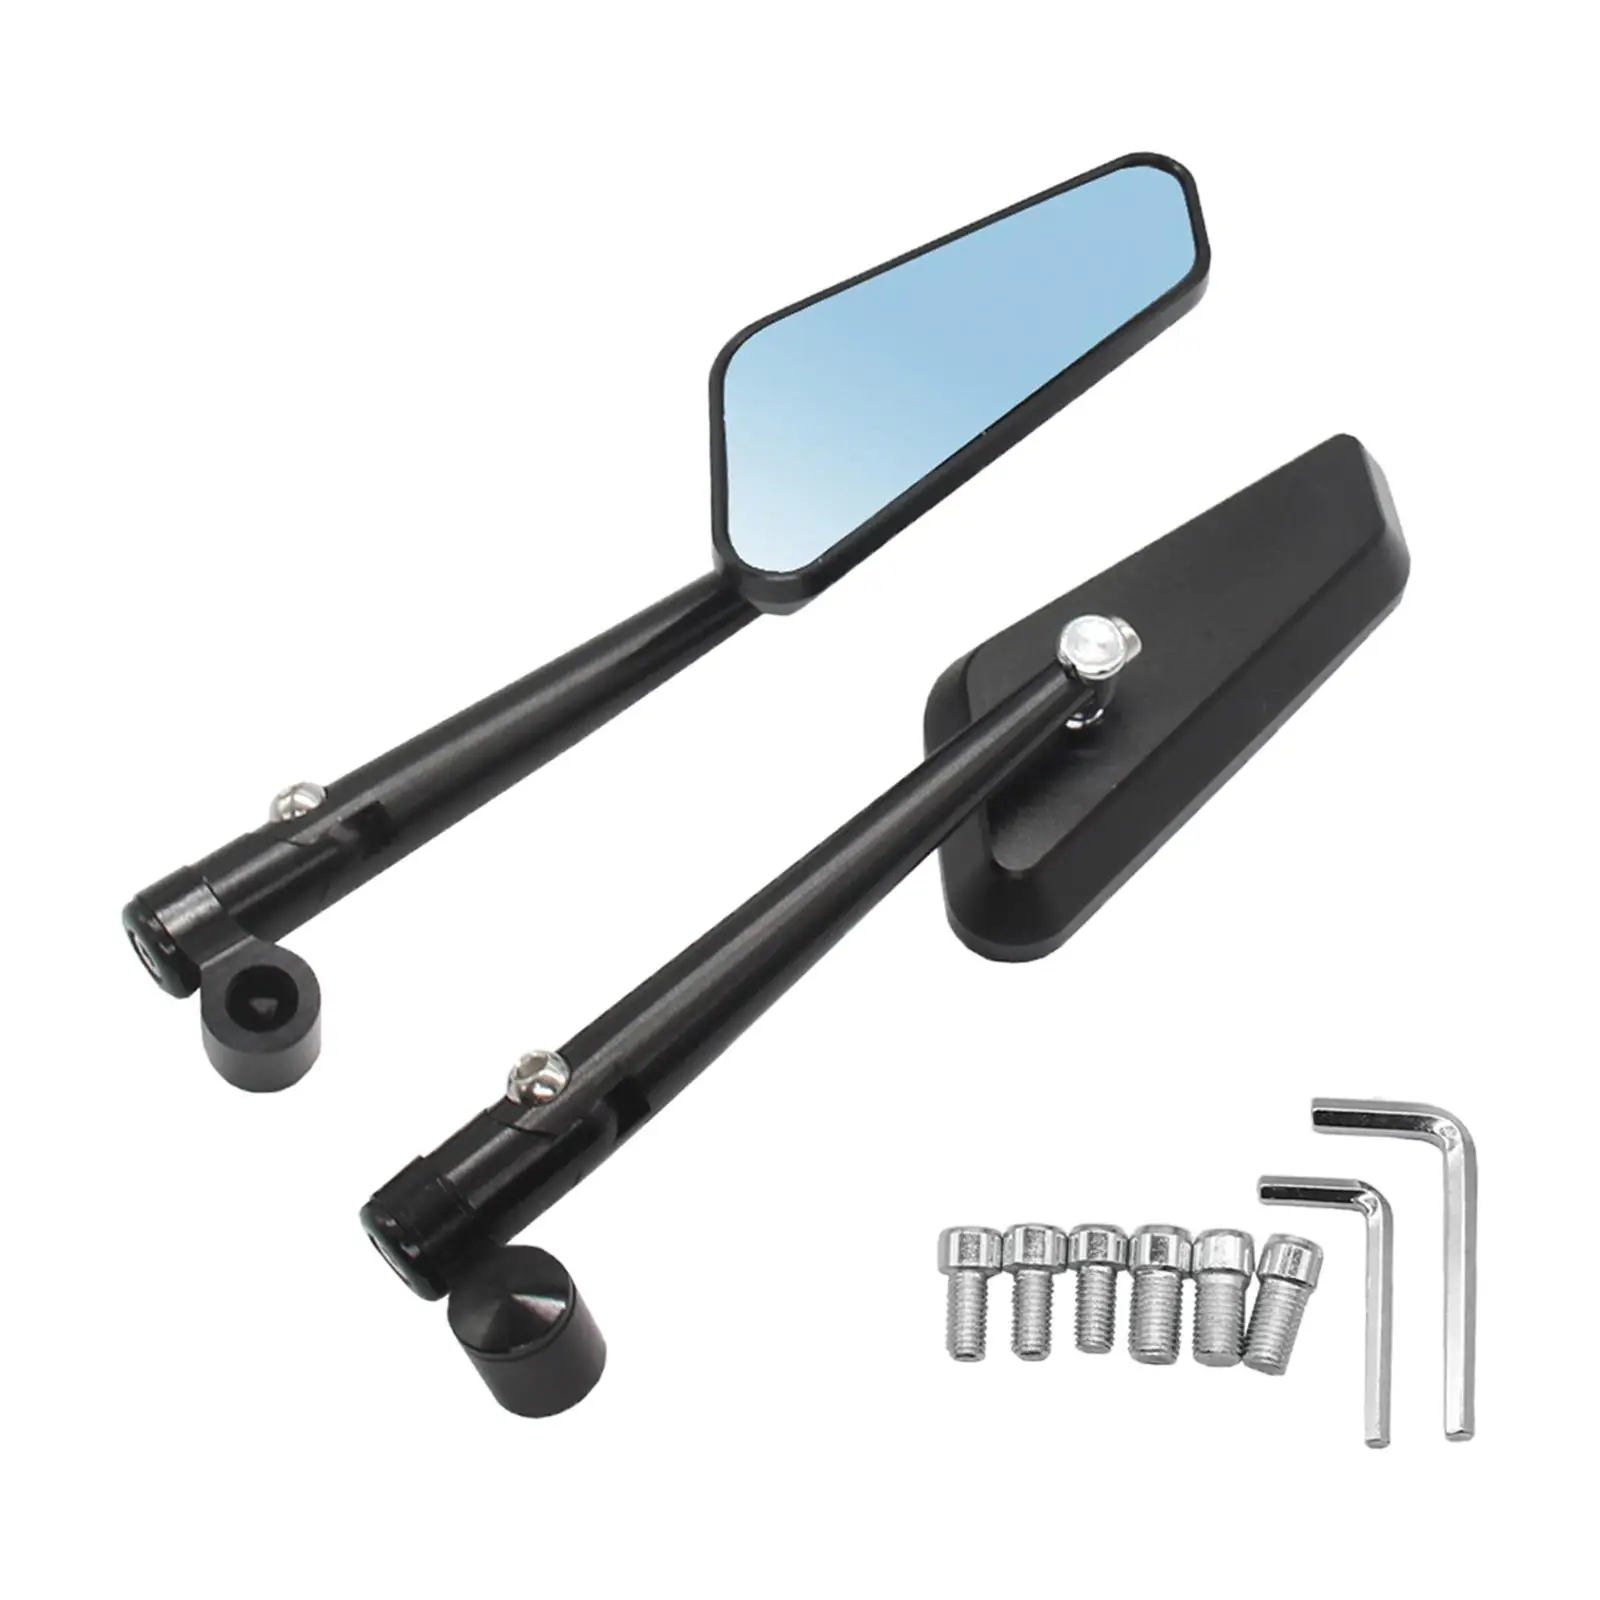 Motorcycle CNC Aluminum Rearview Mirrors Adjustable Anti Glare Glass Durable